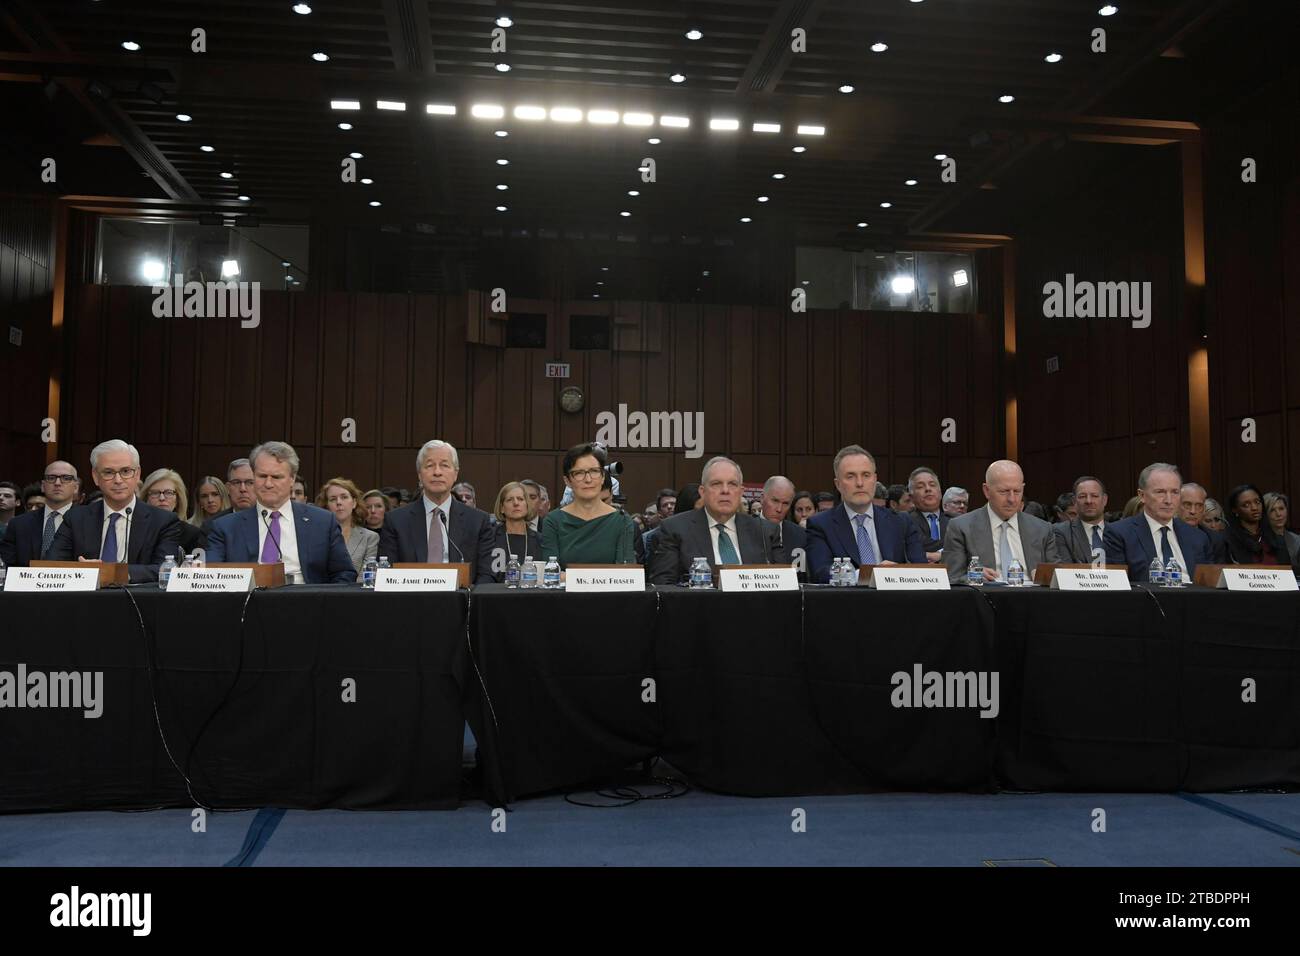 US CEO'S Banking(L-R) Mr. Charles W. Scharf, CEO And President, Wells Fargo & Company; Mr. Brian Thomas Moynihan, Chairman And CEO, Bank of America; Mr. Jamie Dimon, Chairman And CEO, JPMorgan Chase & Co.; Ms. Jane Fraser, CEO, Citigroup; Mr. Ronald O'Hanley, CEO, State Street; Mr. Robin Vince, CEO, BNY Mellon; Mr. David Solomon, CEO, Goldman Sachs; Mr. James P. Gorman, CEO, Morgan Stanley testify before Senate Banking, Housing, and Urban Affairs Committee about oversight to examine Wall Street firms during a hearing; today on December 06, 2023 at Senate Hart/Capitol Hill in Washington DC, USA Stock Photo